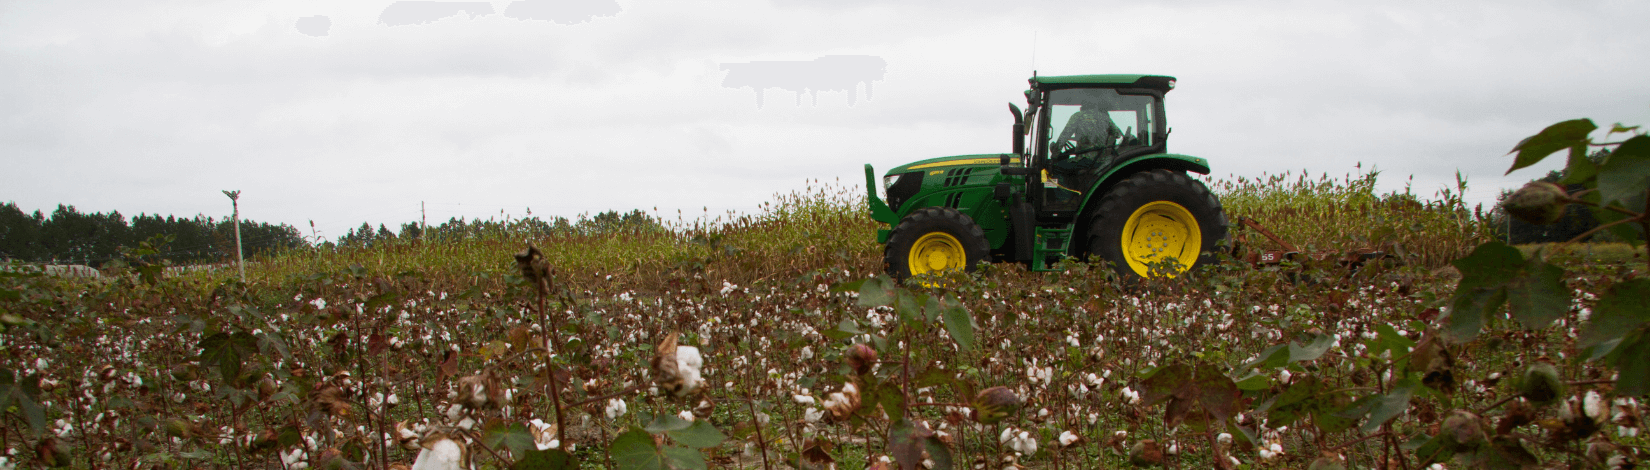 Tractor in a cotton field